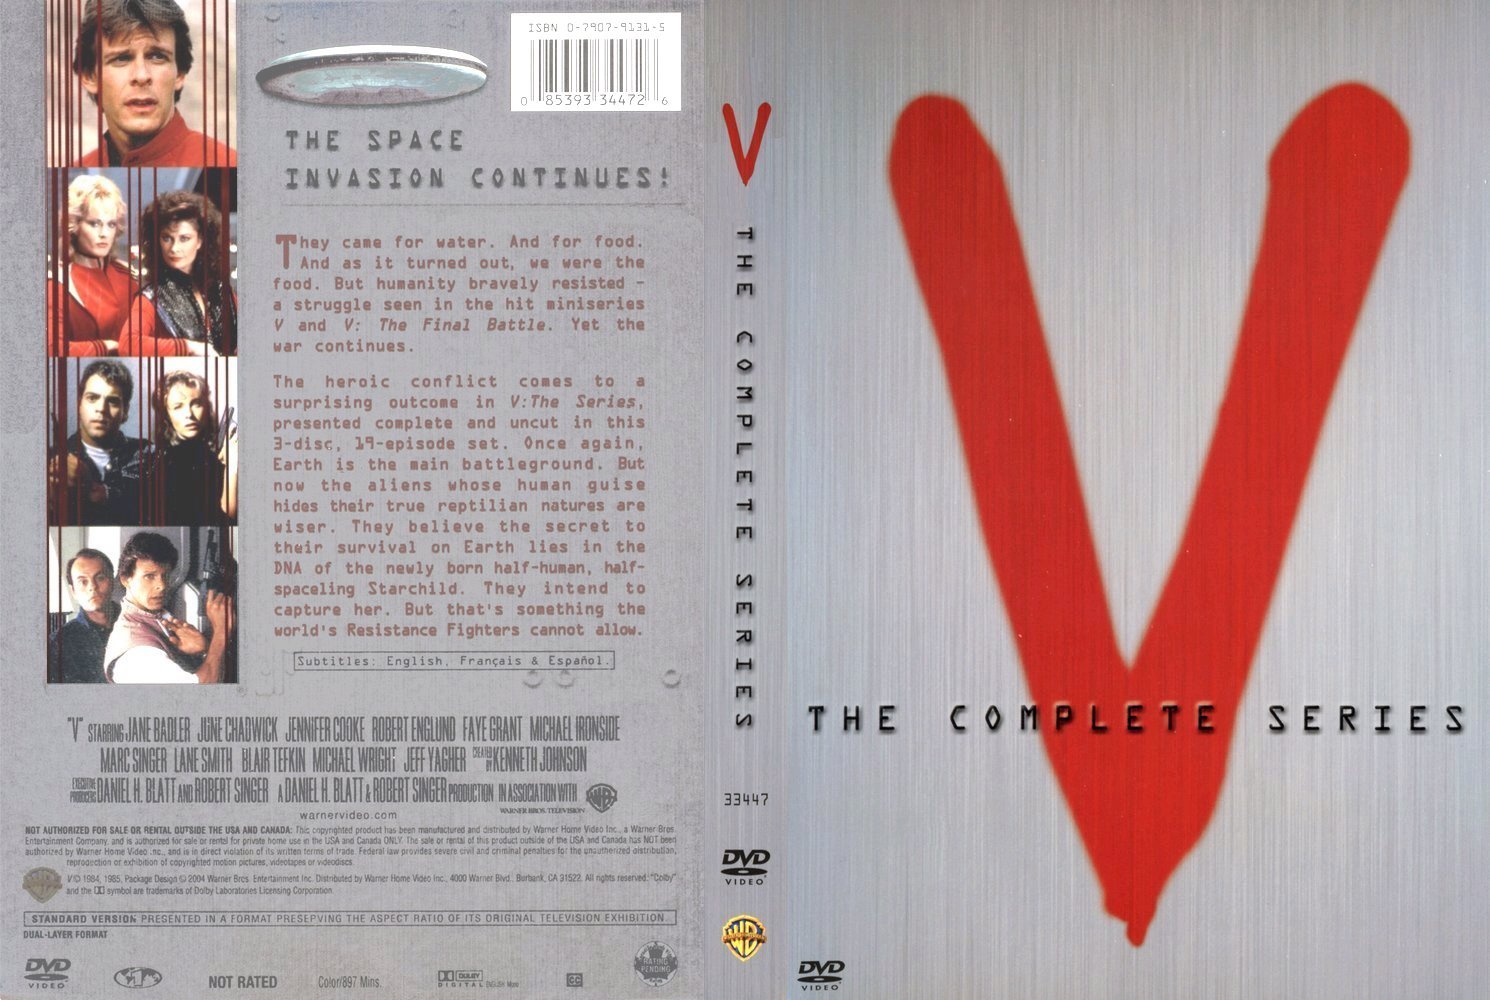 Jaquette DVD V The Complete Series Zone 1